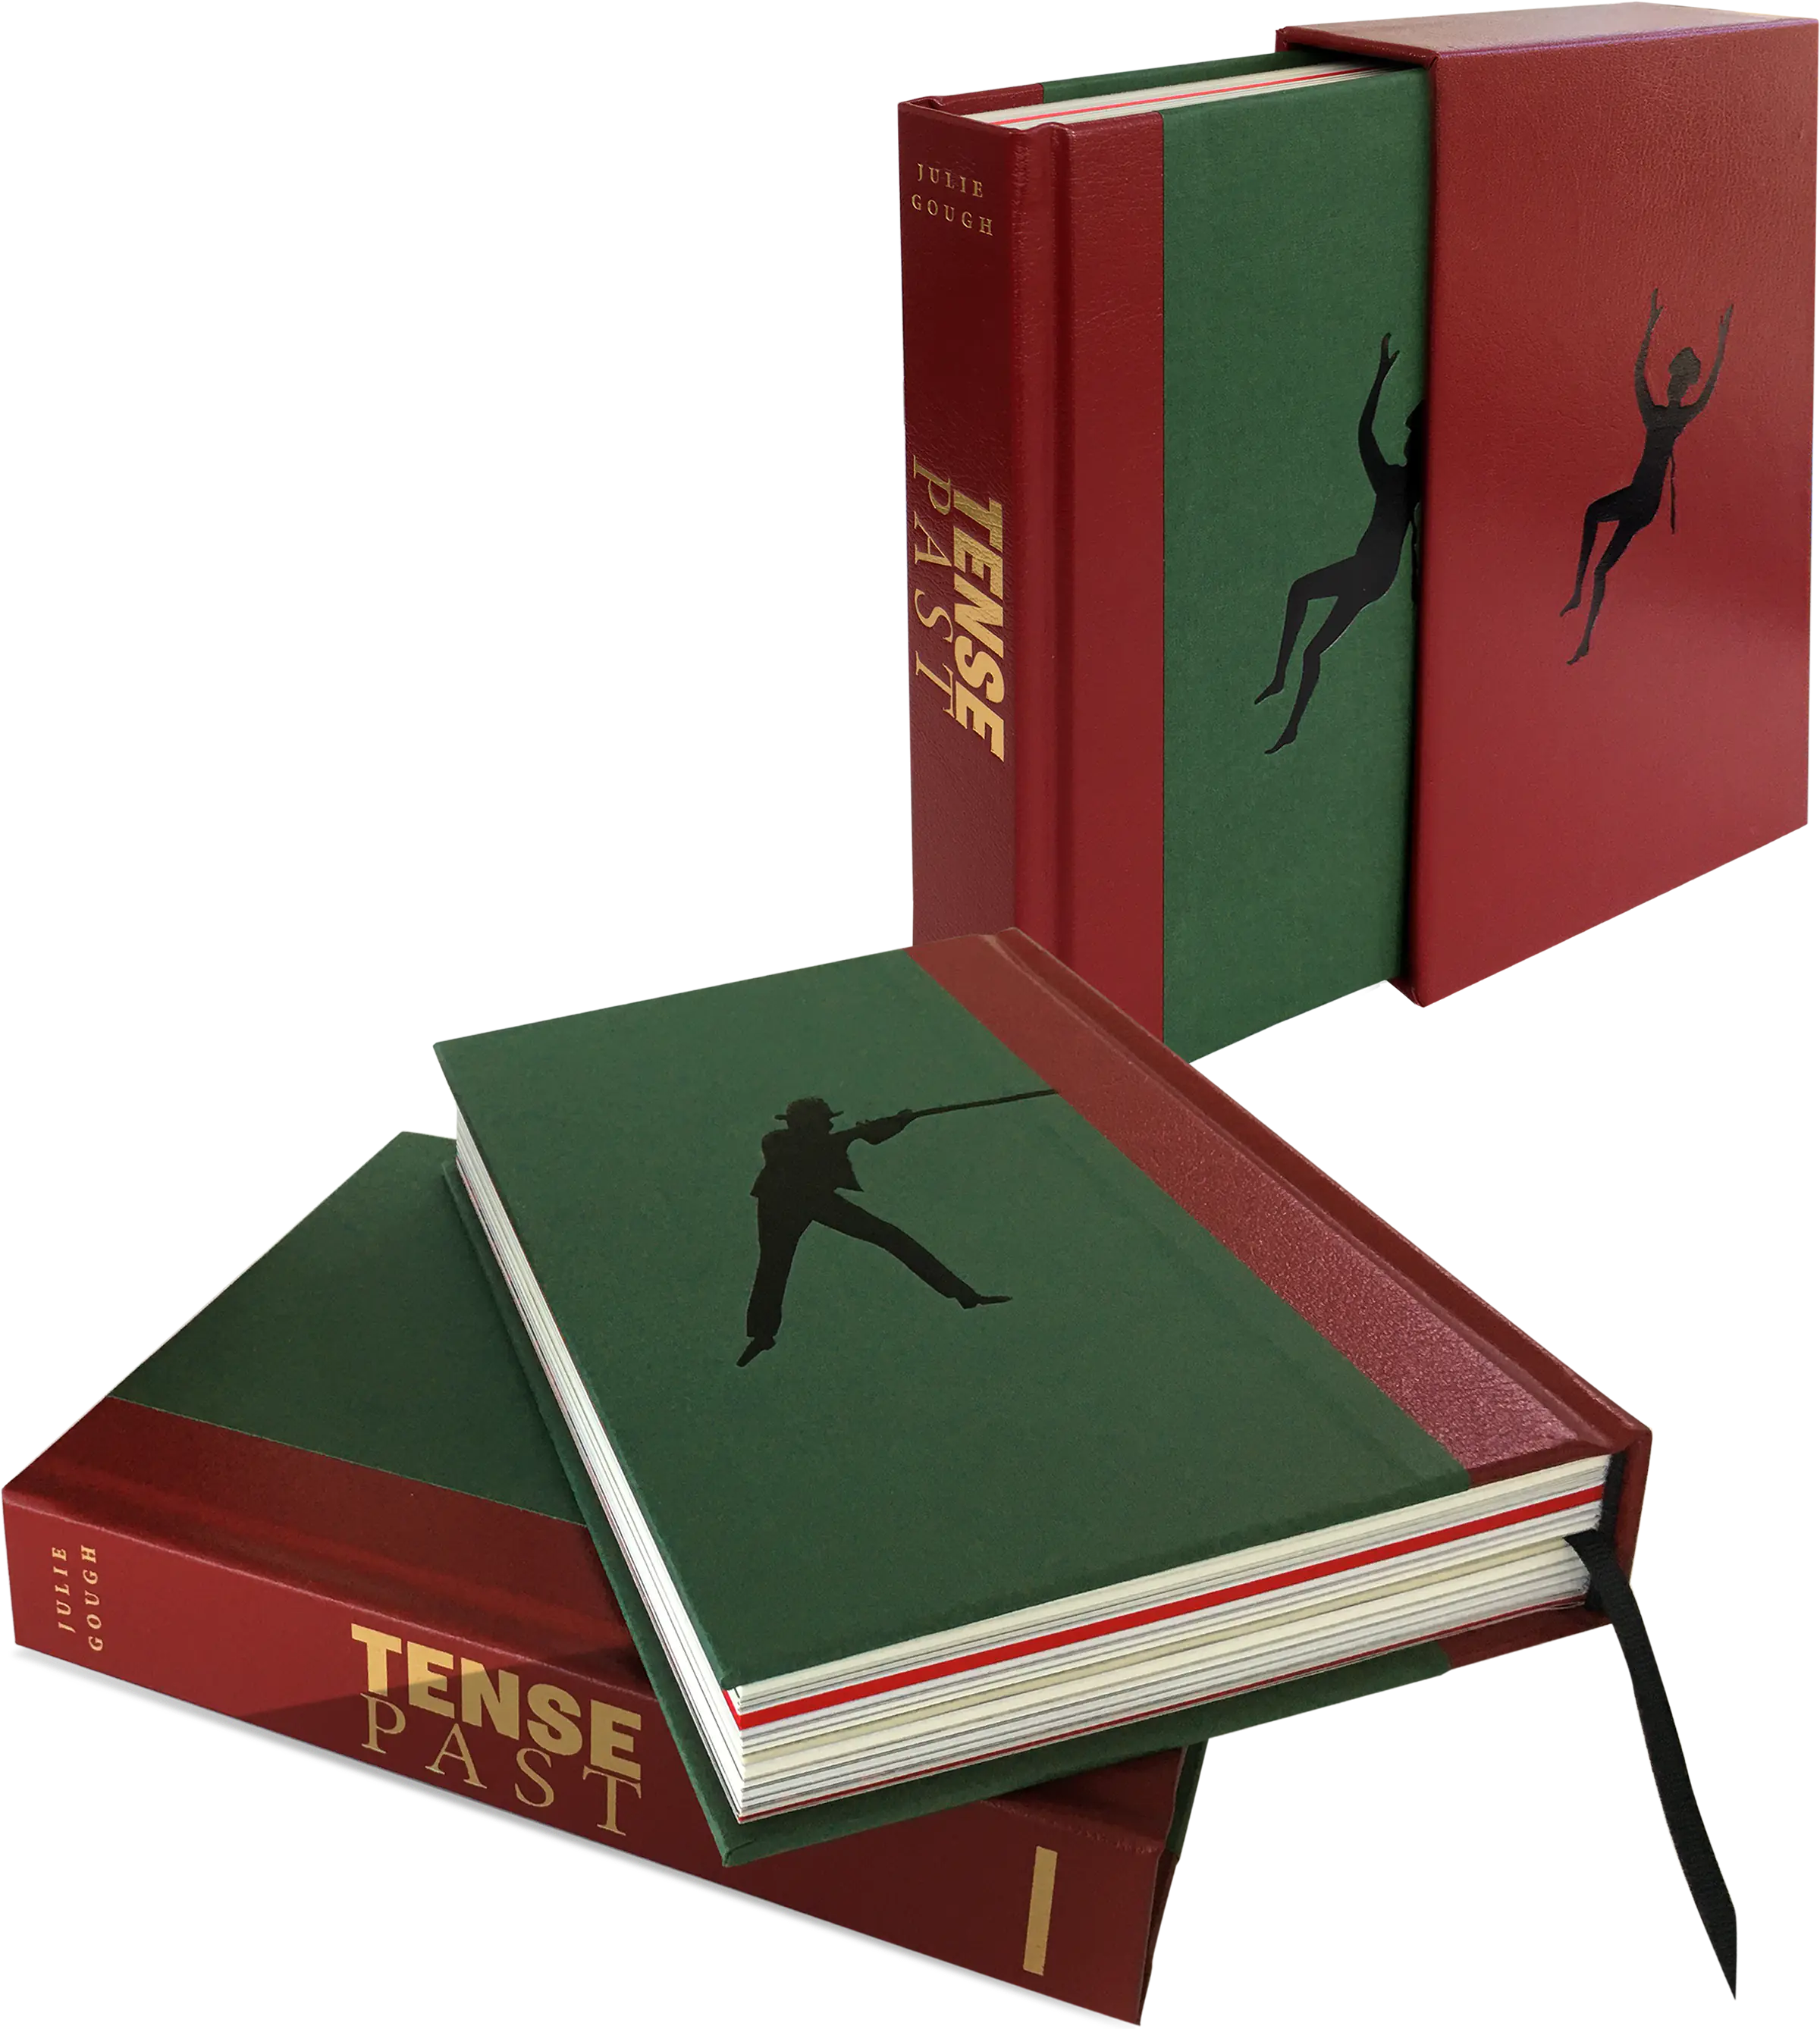 Montage image constructed by Lynda Warner showing three copies of the book TENSE PAST by Julie Gough. The books have red calf leatherette quarter bound spines and green hardcases with black foil silhouettes of a colonialist firing a gun and an Aboriginal man falling backwards after being shot. The title of the book and the author’s name are debossed in gold foil. One of the books also has a leather slipcase.